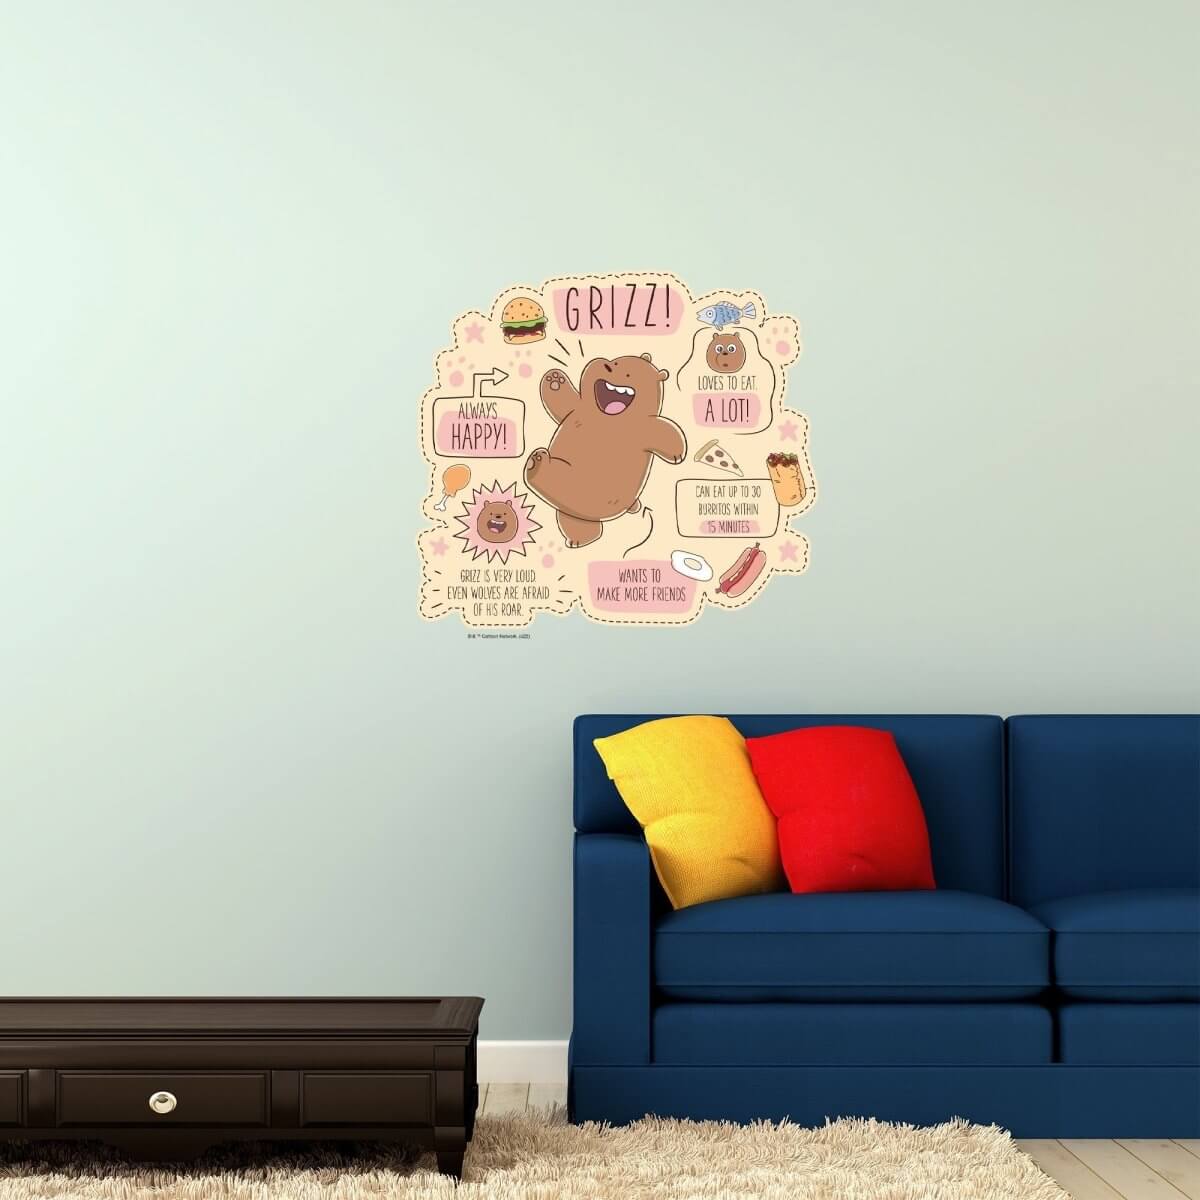 Kismet Decals Home & Room Decor We Bare Bears Get to Know Grizzly Wall decal sticker - officially licensed - latex printed with no solvent odor - Kismet Decals